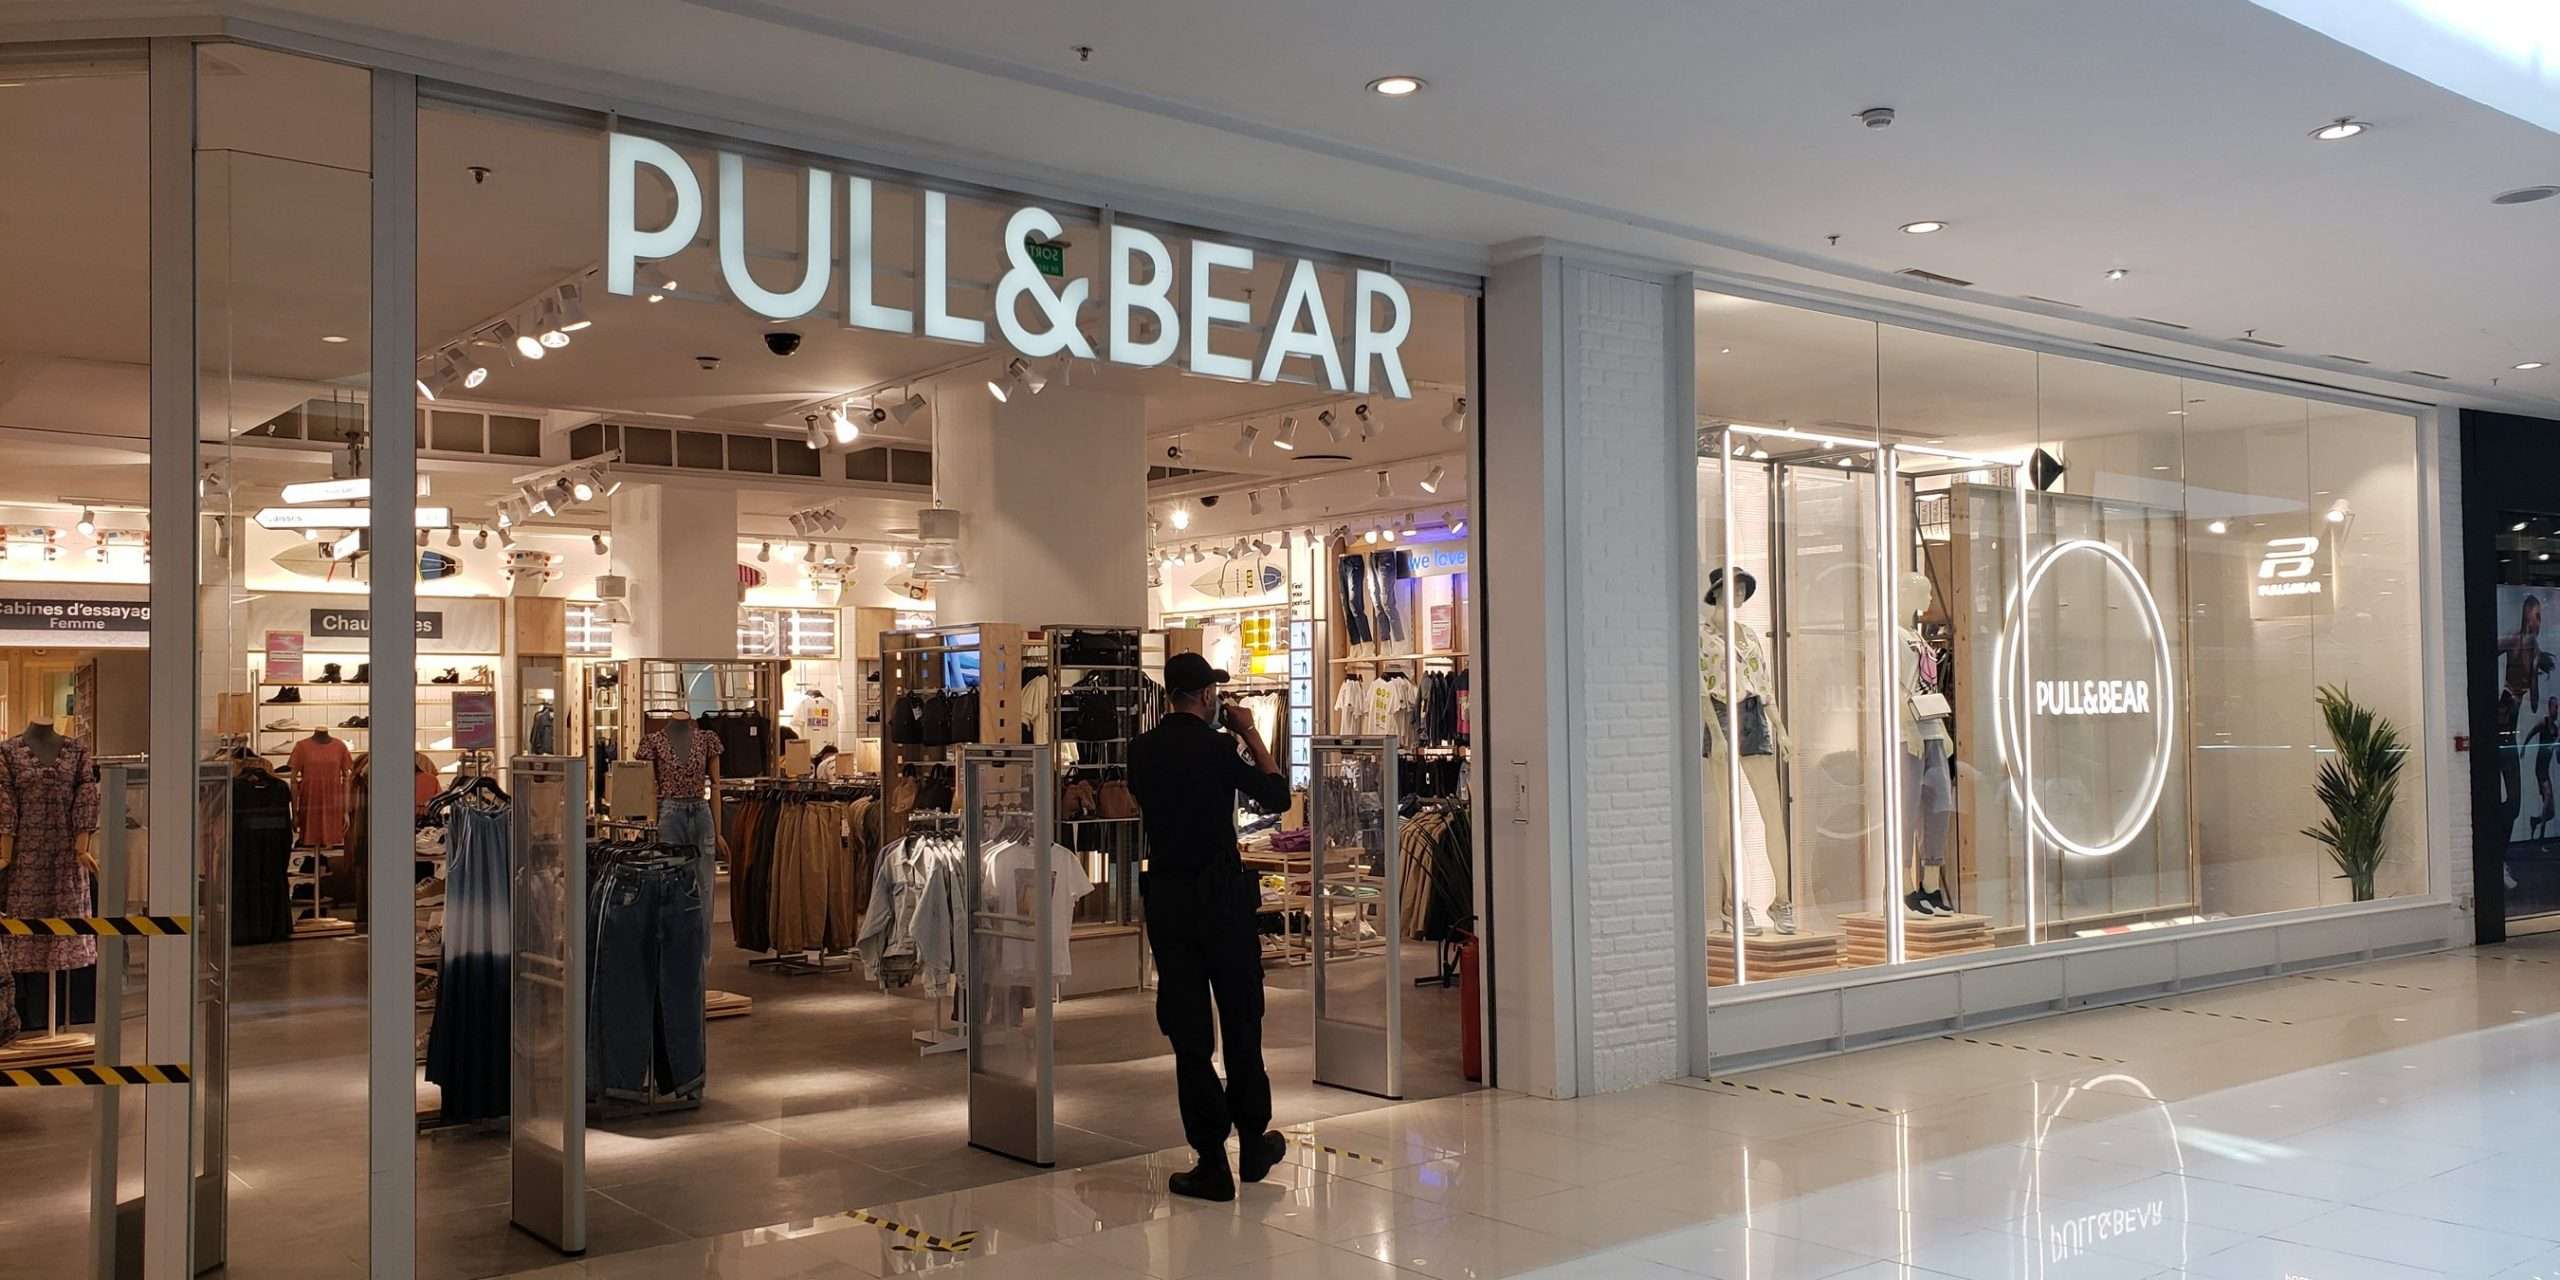 Pull and bear franchise